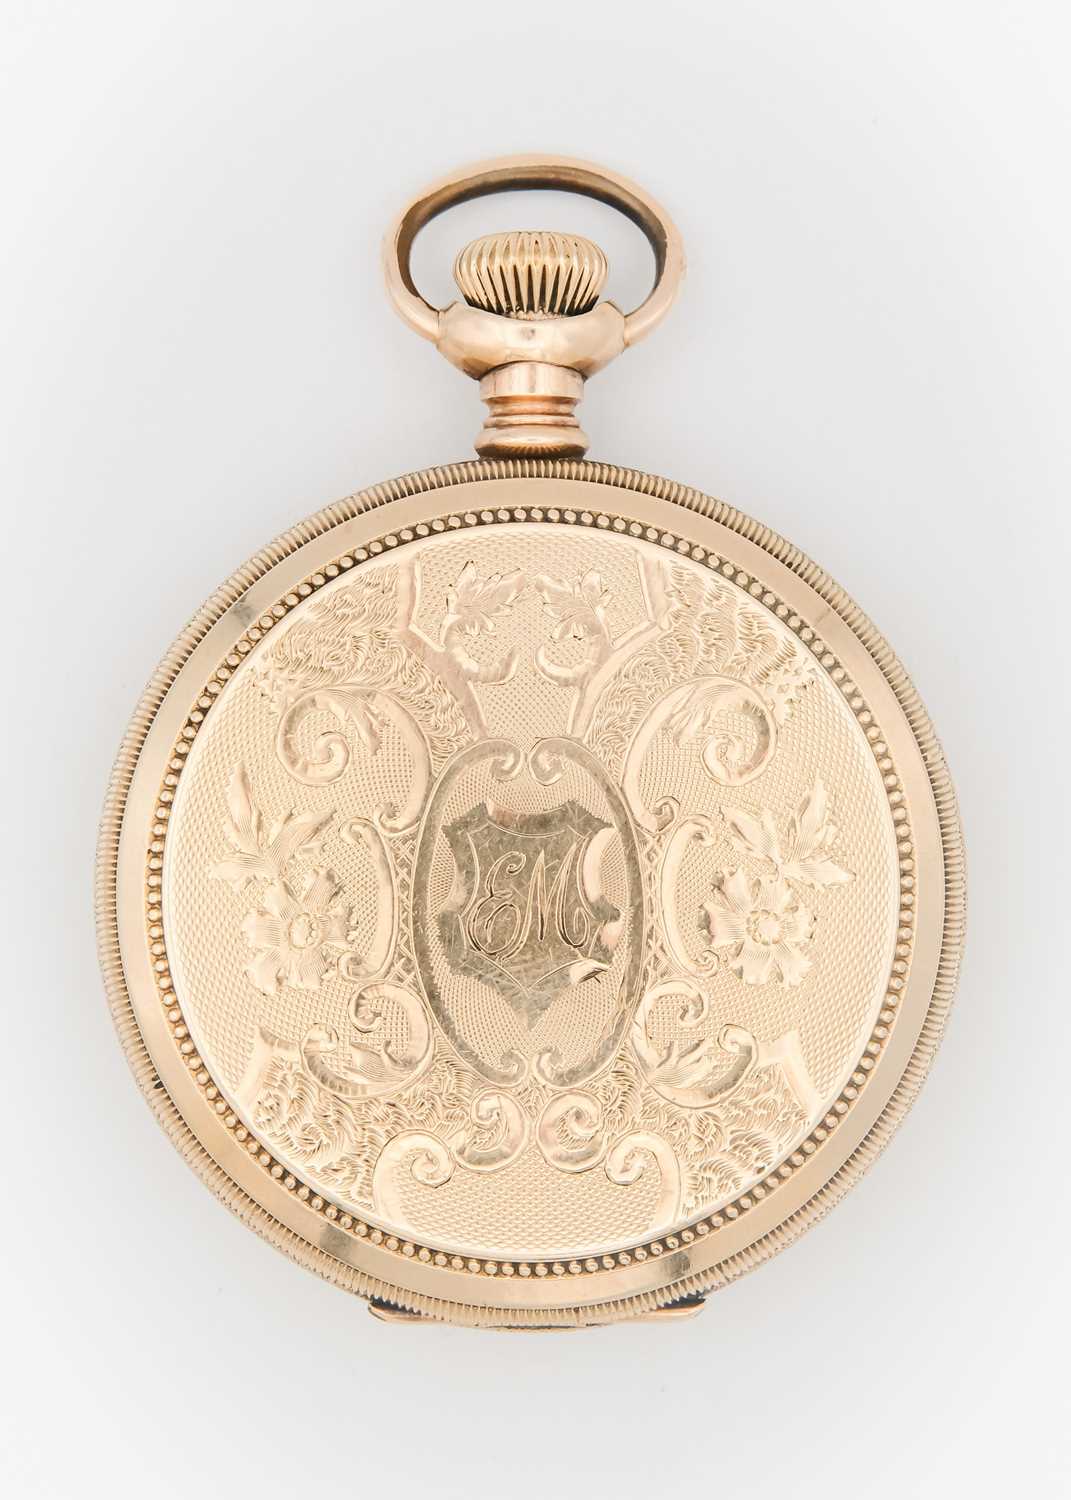 ELGIN - A rose gold plated full hunter crown wind pocket watch. - Image 5 of 6